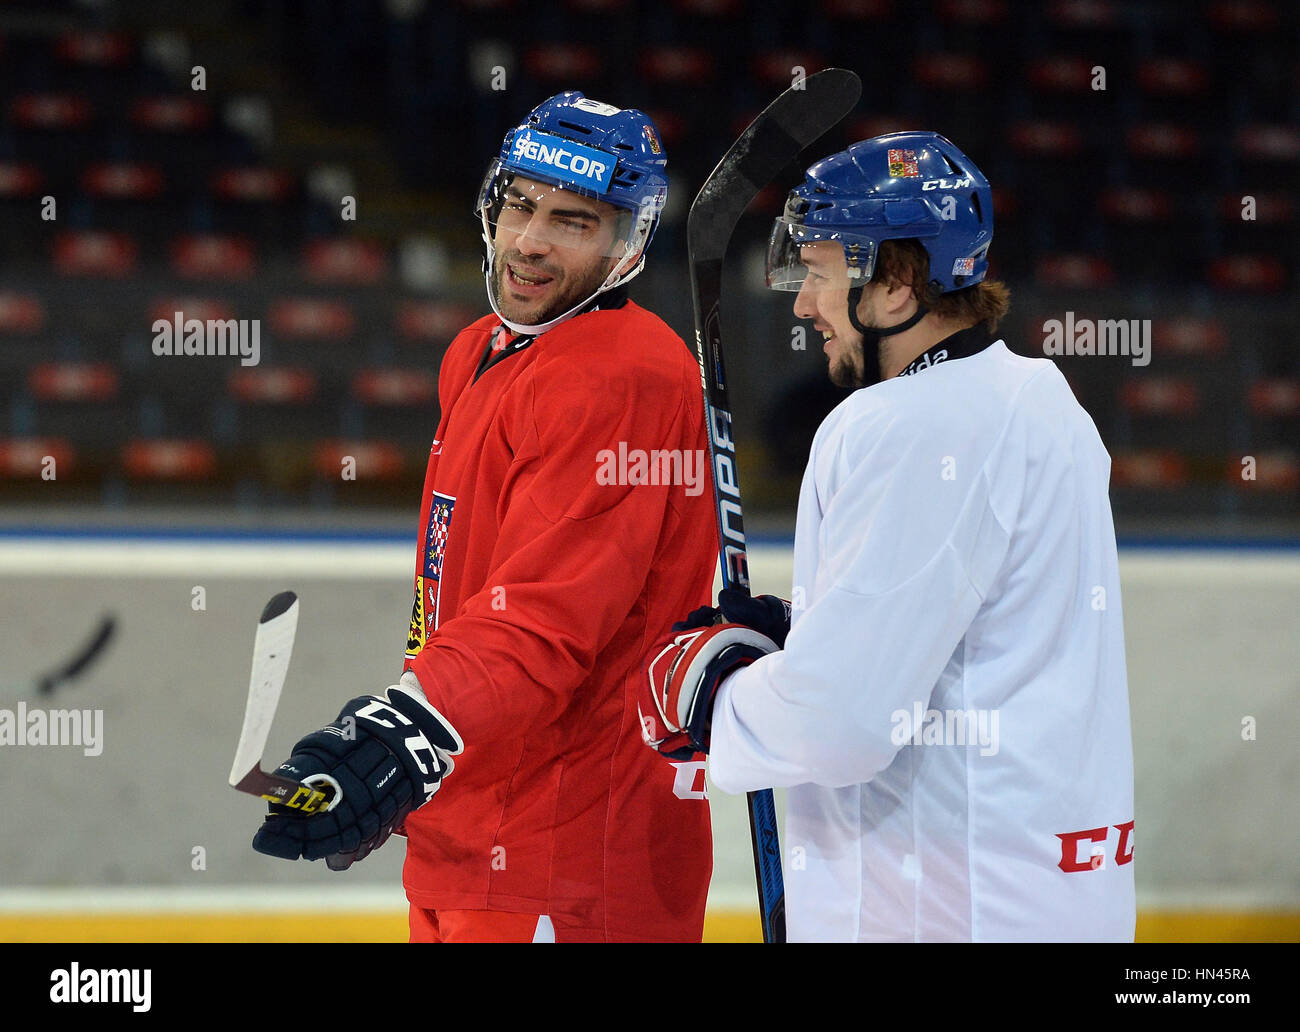 Prague, Czech Republic. 08th Feb, 2017. The Czech national ice-hockey team's players Jan Kovar and Petr Jelinek in action during the training session prior to the February Sweden Games in Gothenburg in Prague, Czech Republic, February 8, 2017. Sweden Games, the third part of the European Hockey Tour (EHT) series, will take place on February 9-12. Credit: Katerina Sulova/CTK Photo/Alamy Live News Stock Photo